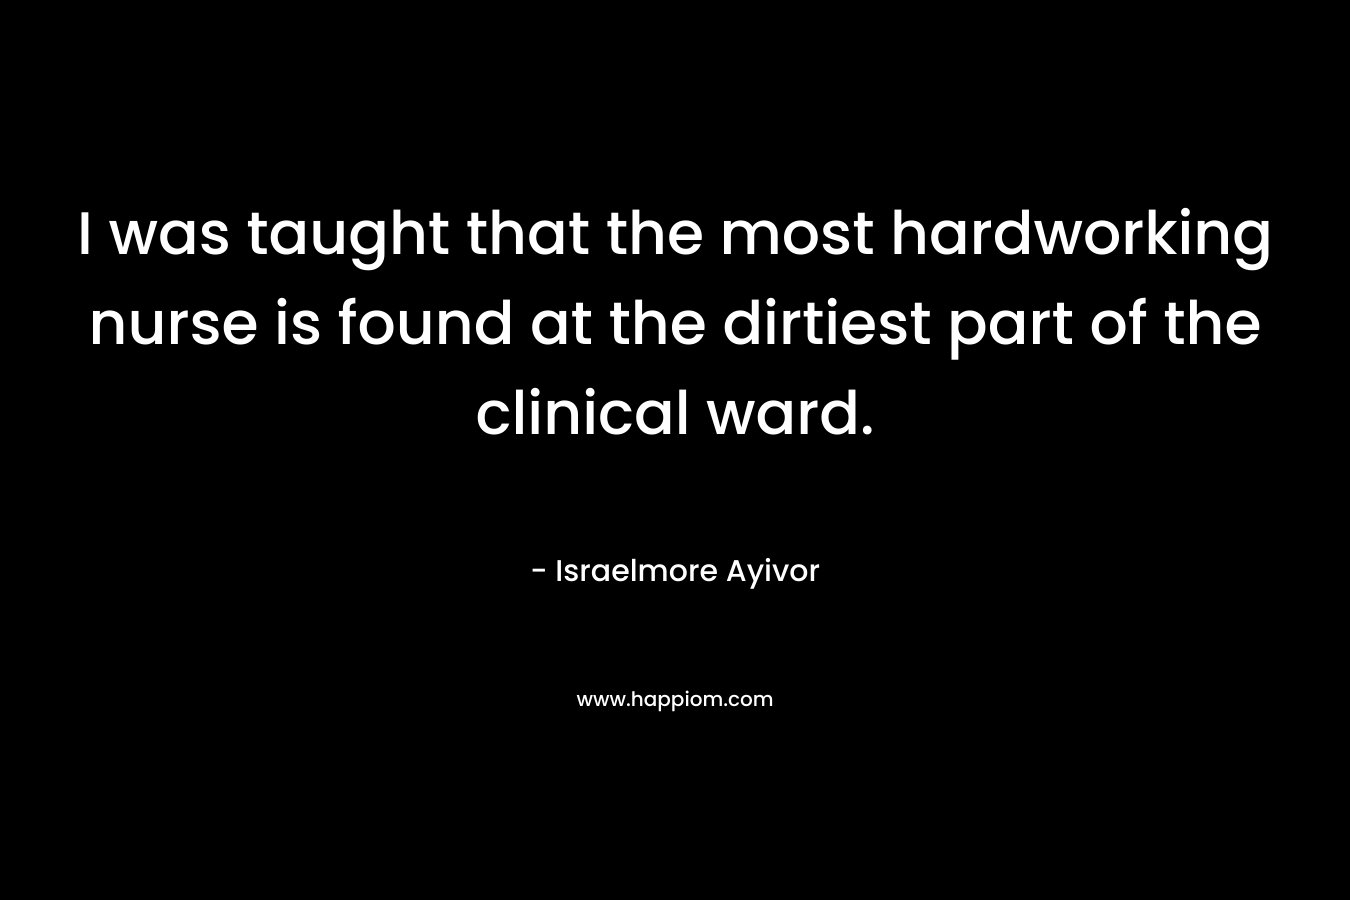 I was taught that the most hardworking nurse is found at the dirtiest part of the clinical ward. – Israelmore Ayivor